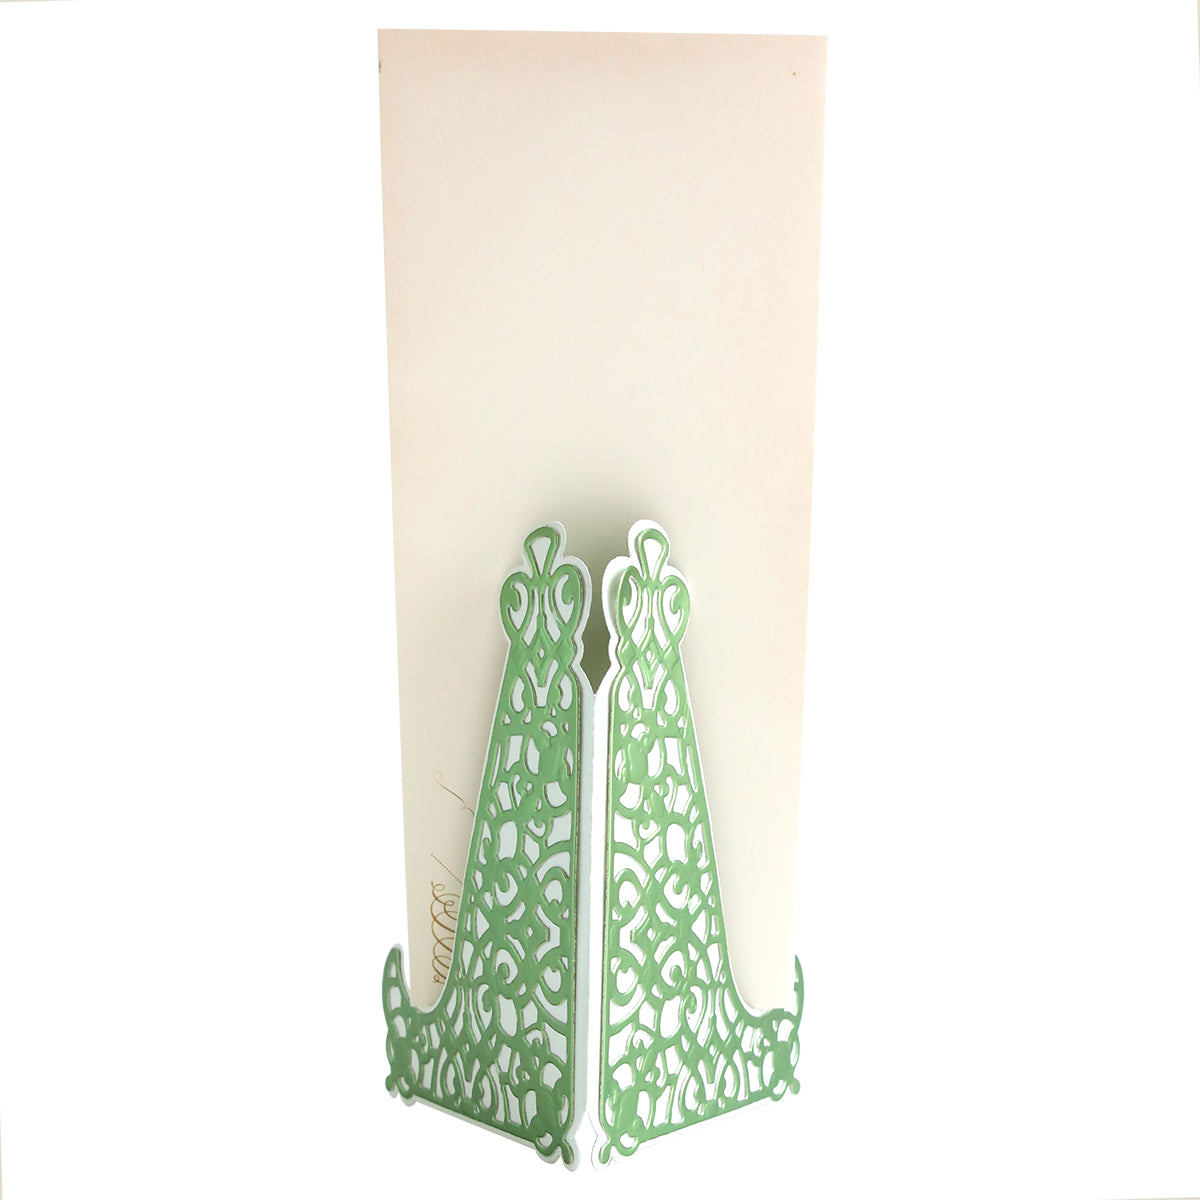 A Tall Card Stand Dies on a white background, perfect for oversized cards.